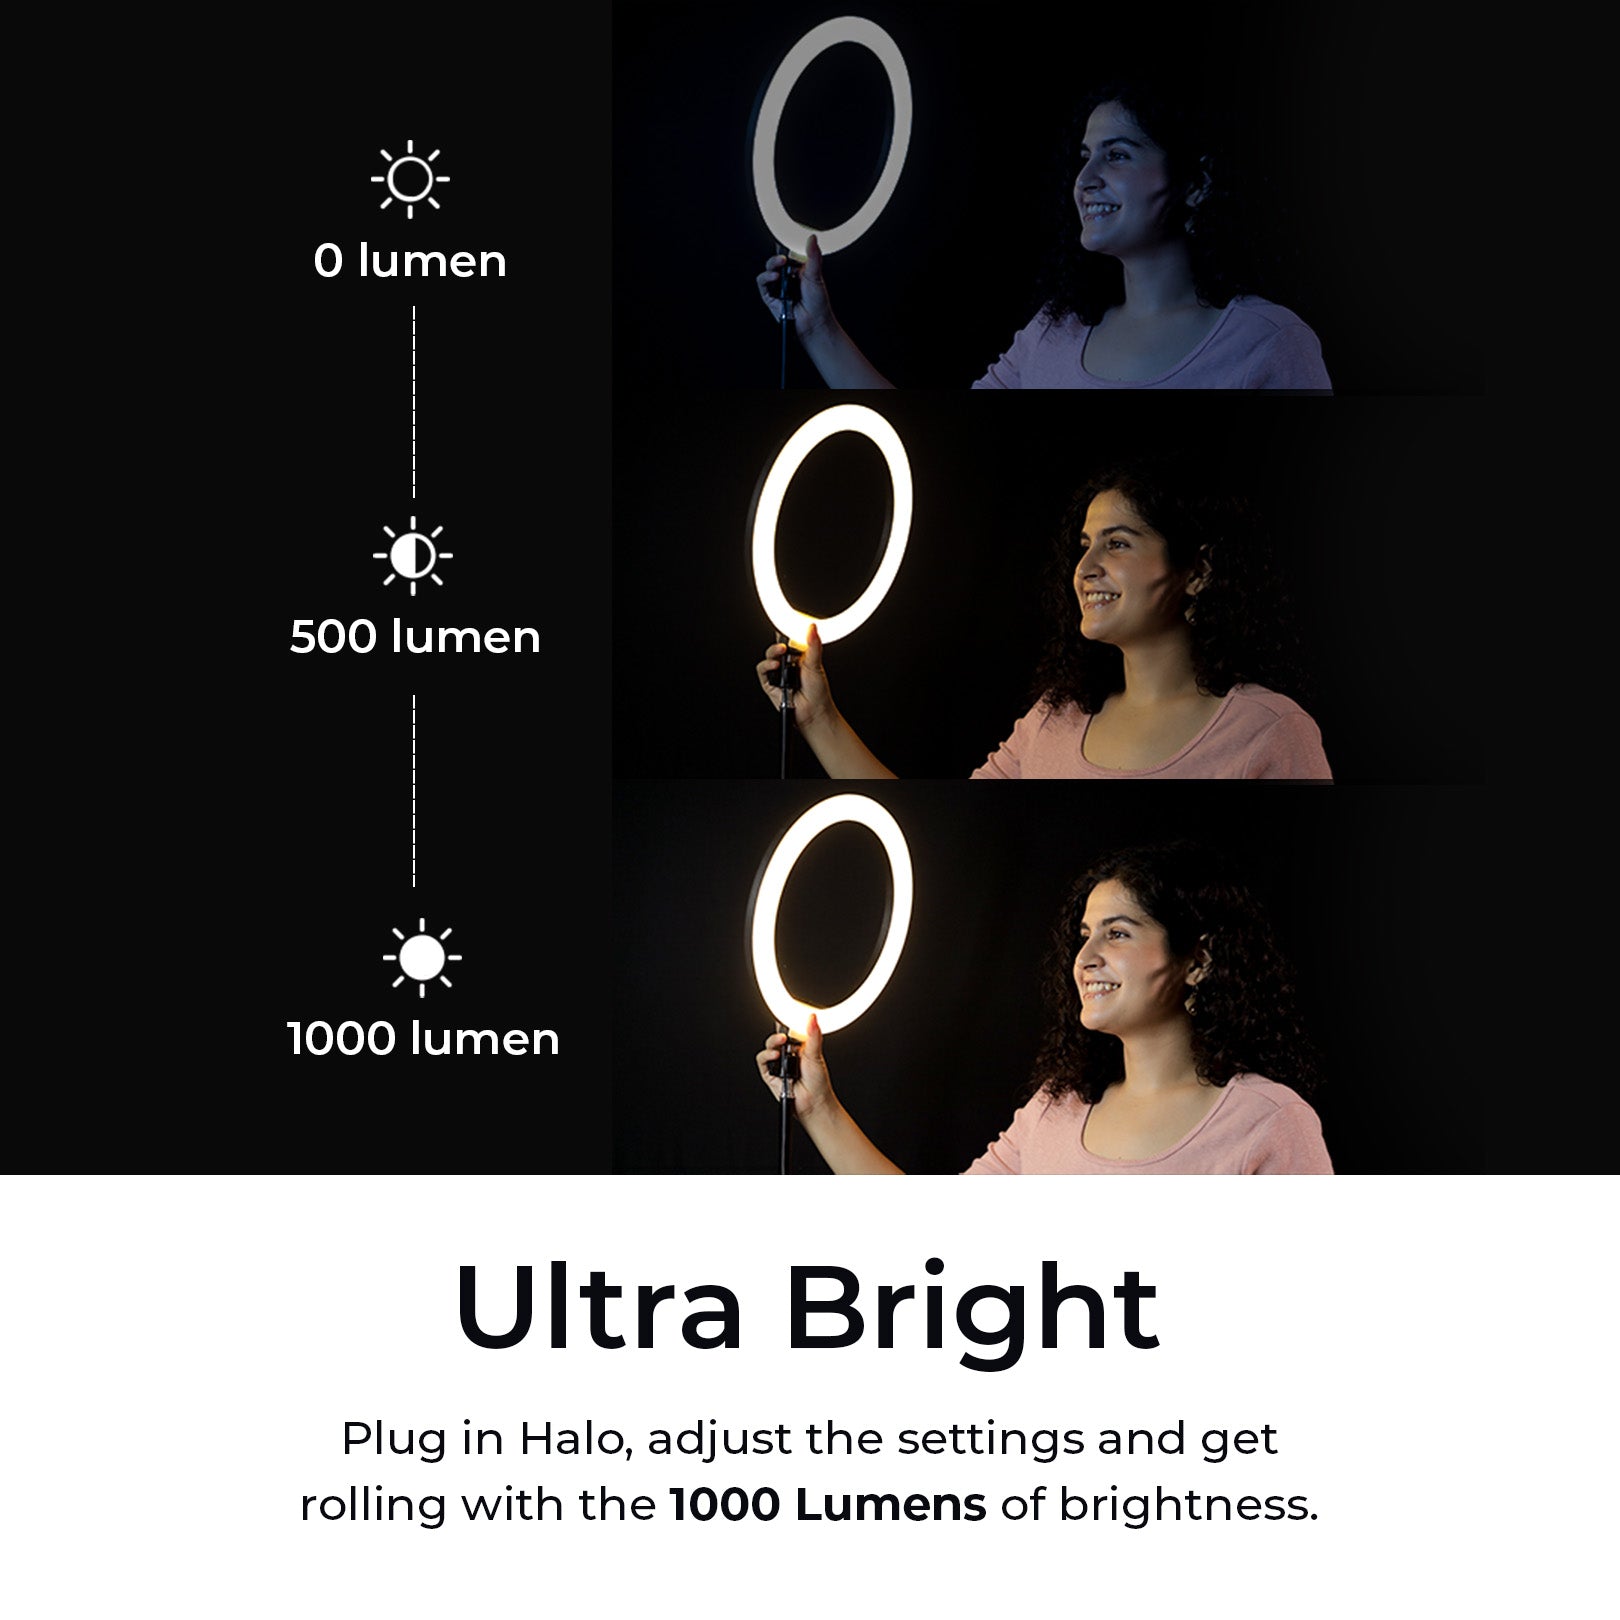 DIGITEK DRL-15C 15 INCHES RGB LED RING LIGHT Best Price:  thereliablestore.com: Ring Lights India